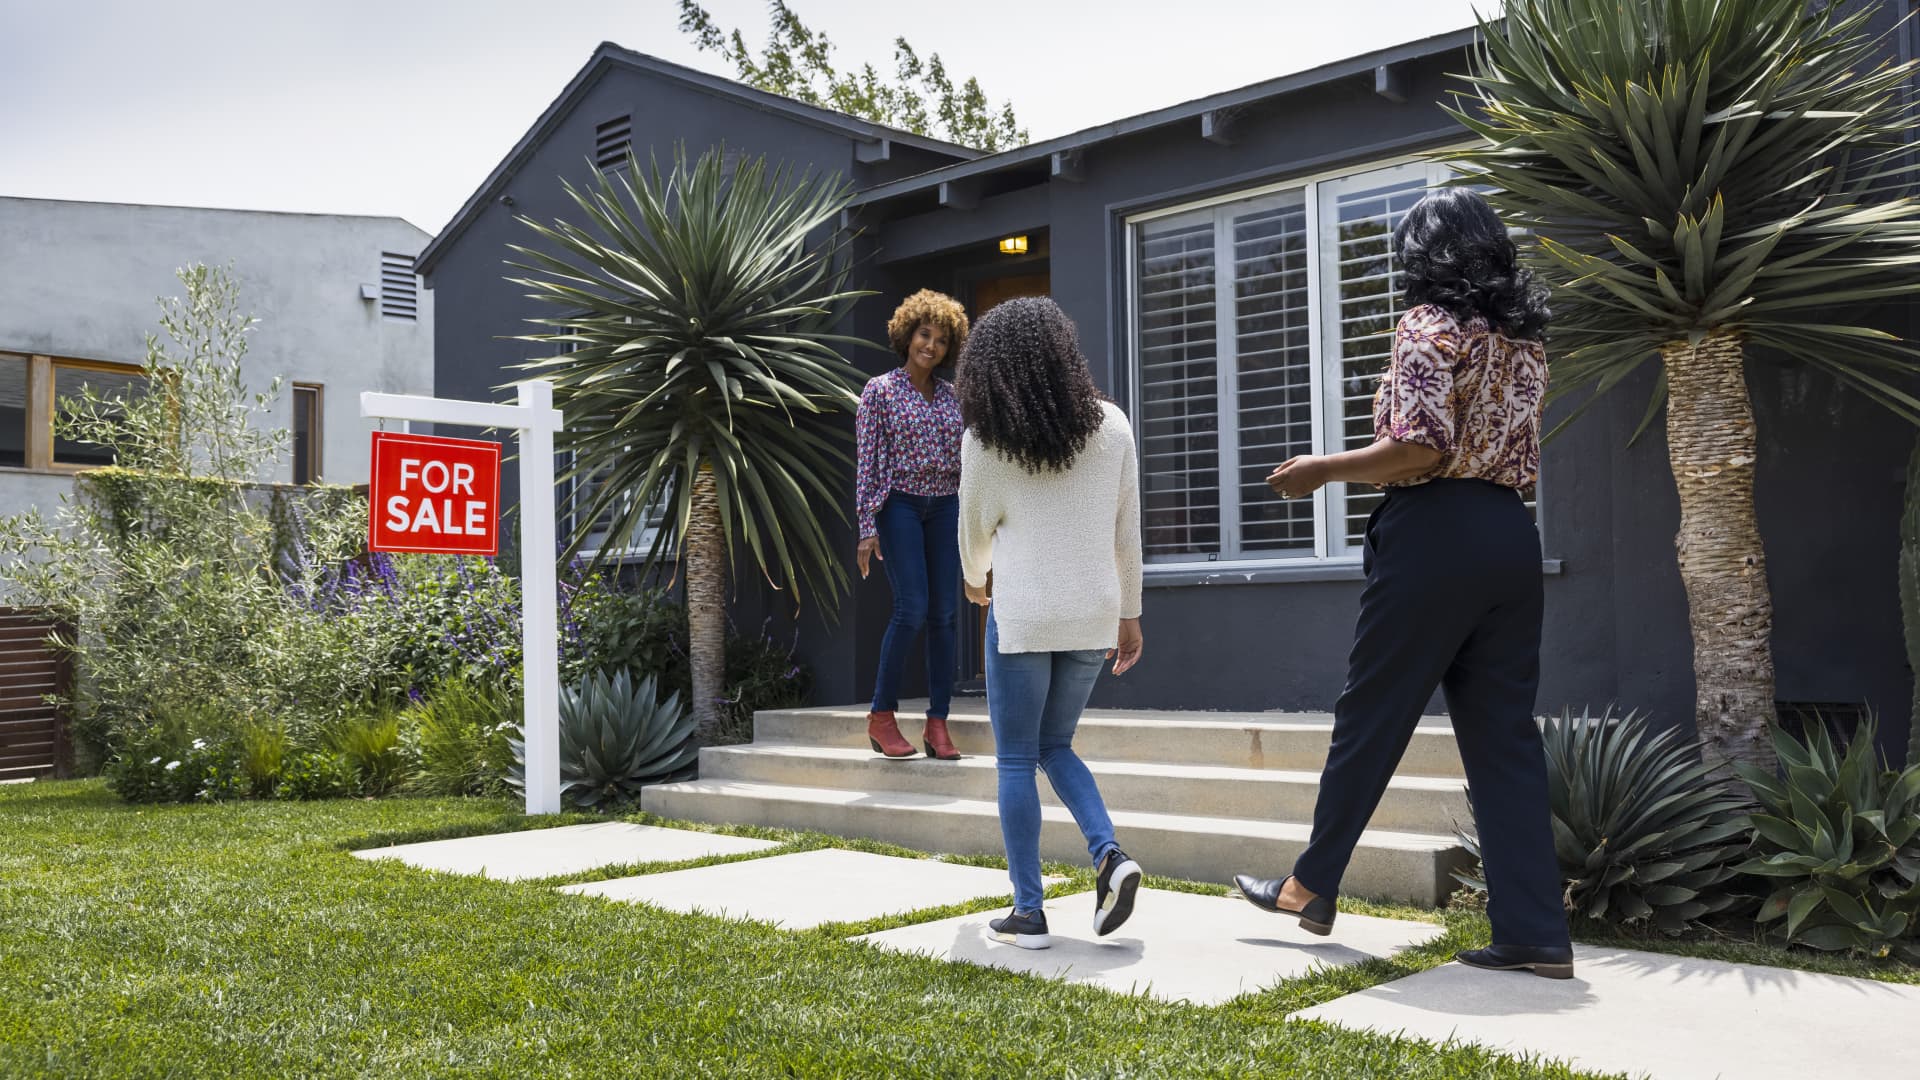 Mortgage rates will fall to 4.5% in 2023? That’s the estimate from Fannie Mae. Here’s what that means for homebuyers